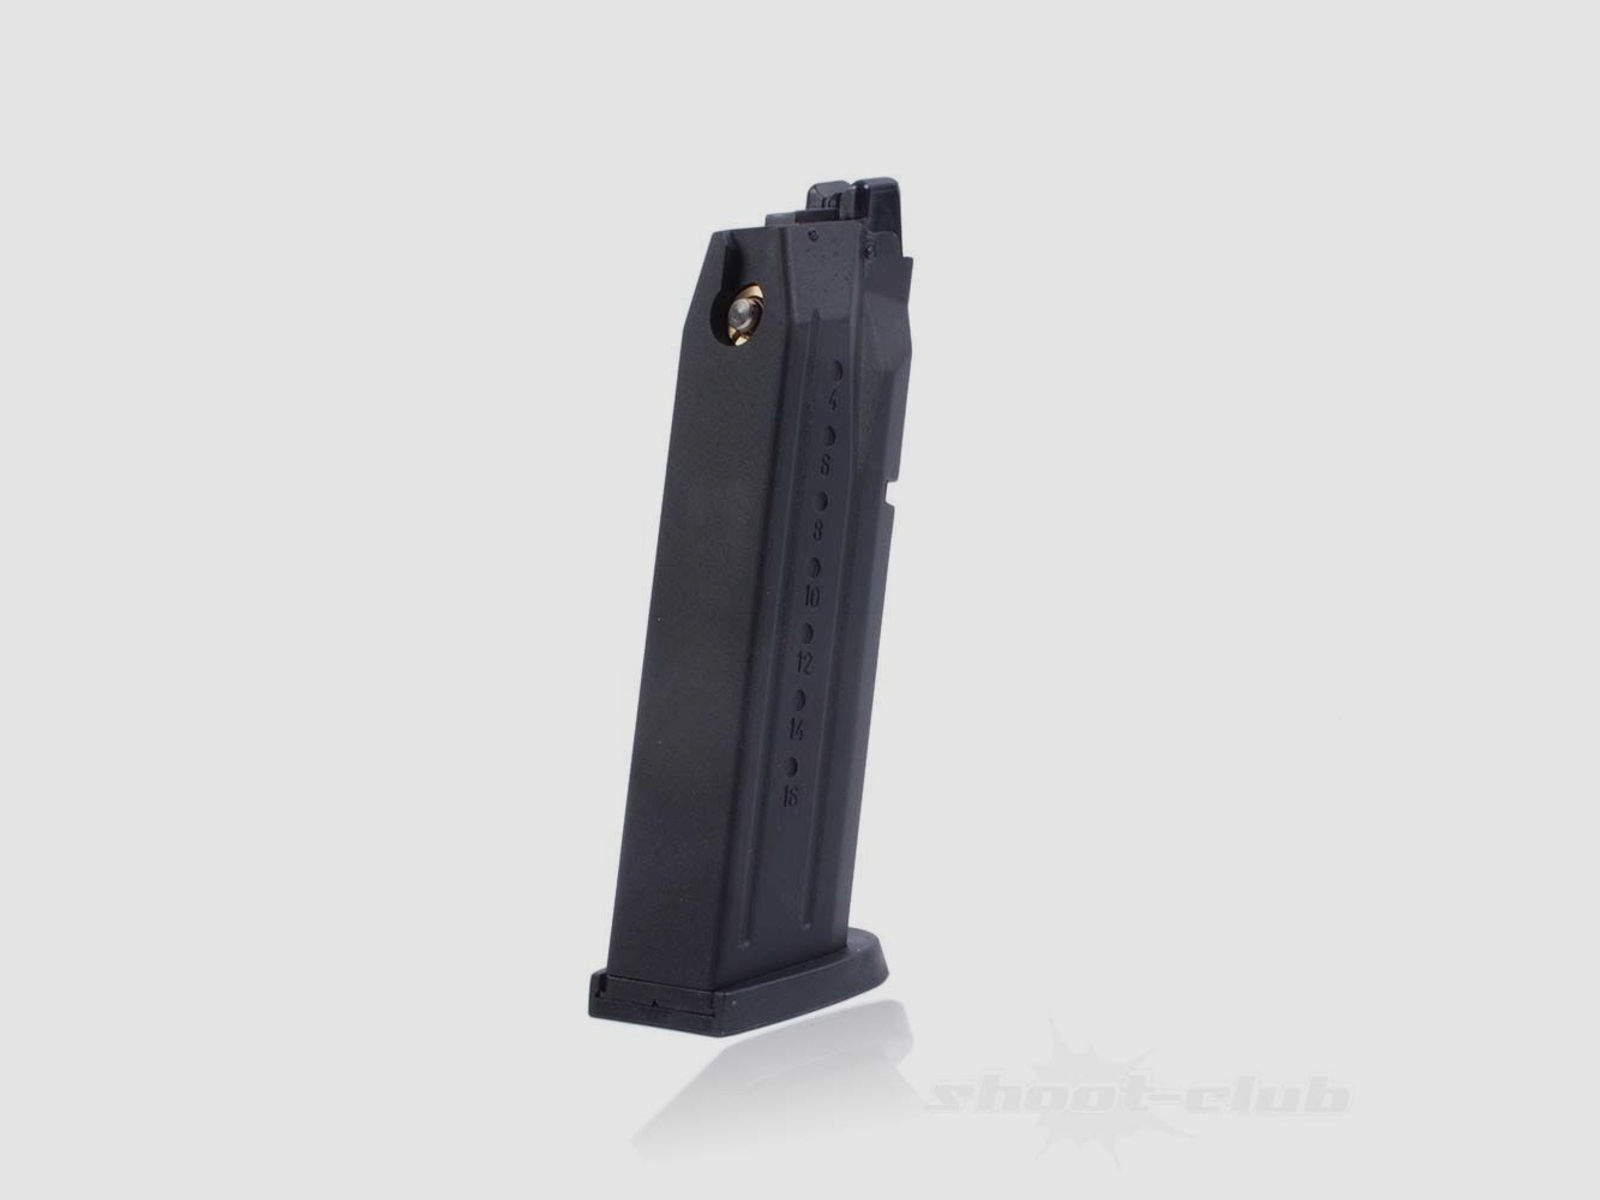 Smith & Wesson M&P9 Performance Center Magazin Kal. 6mm